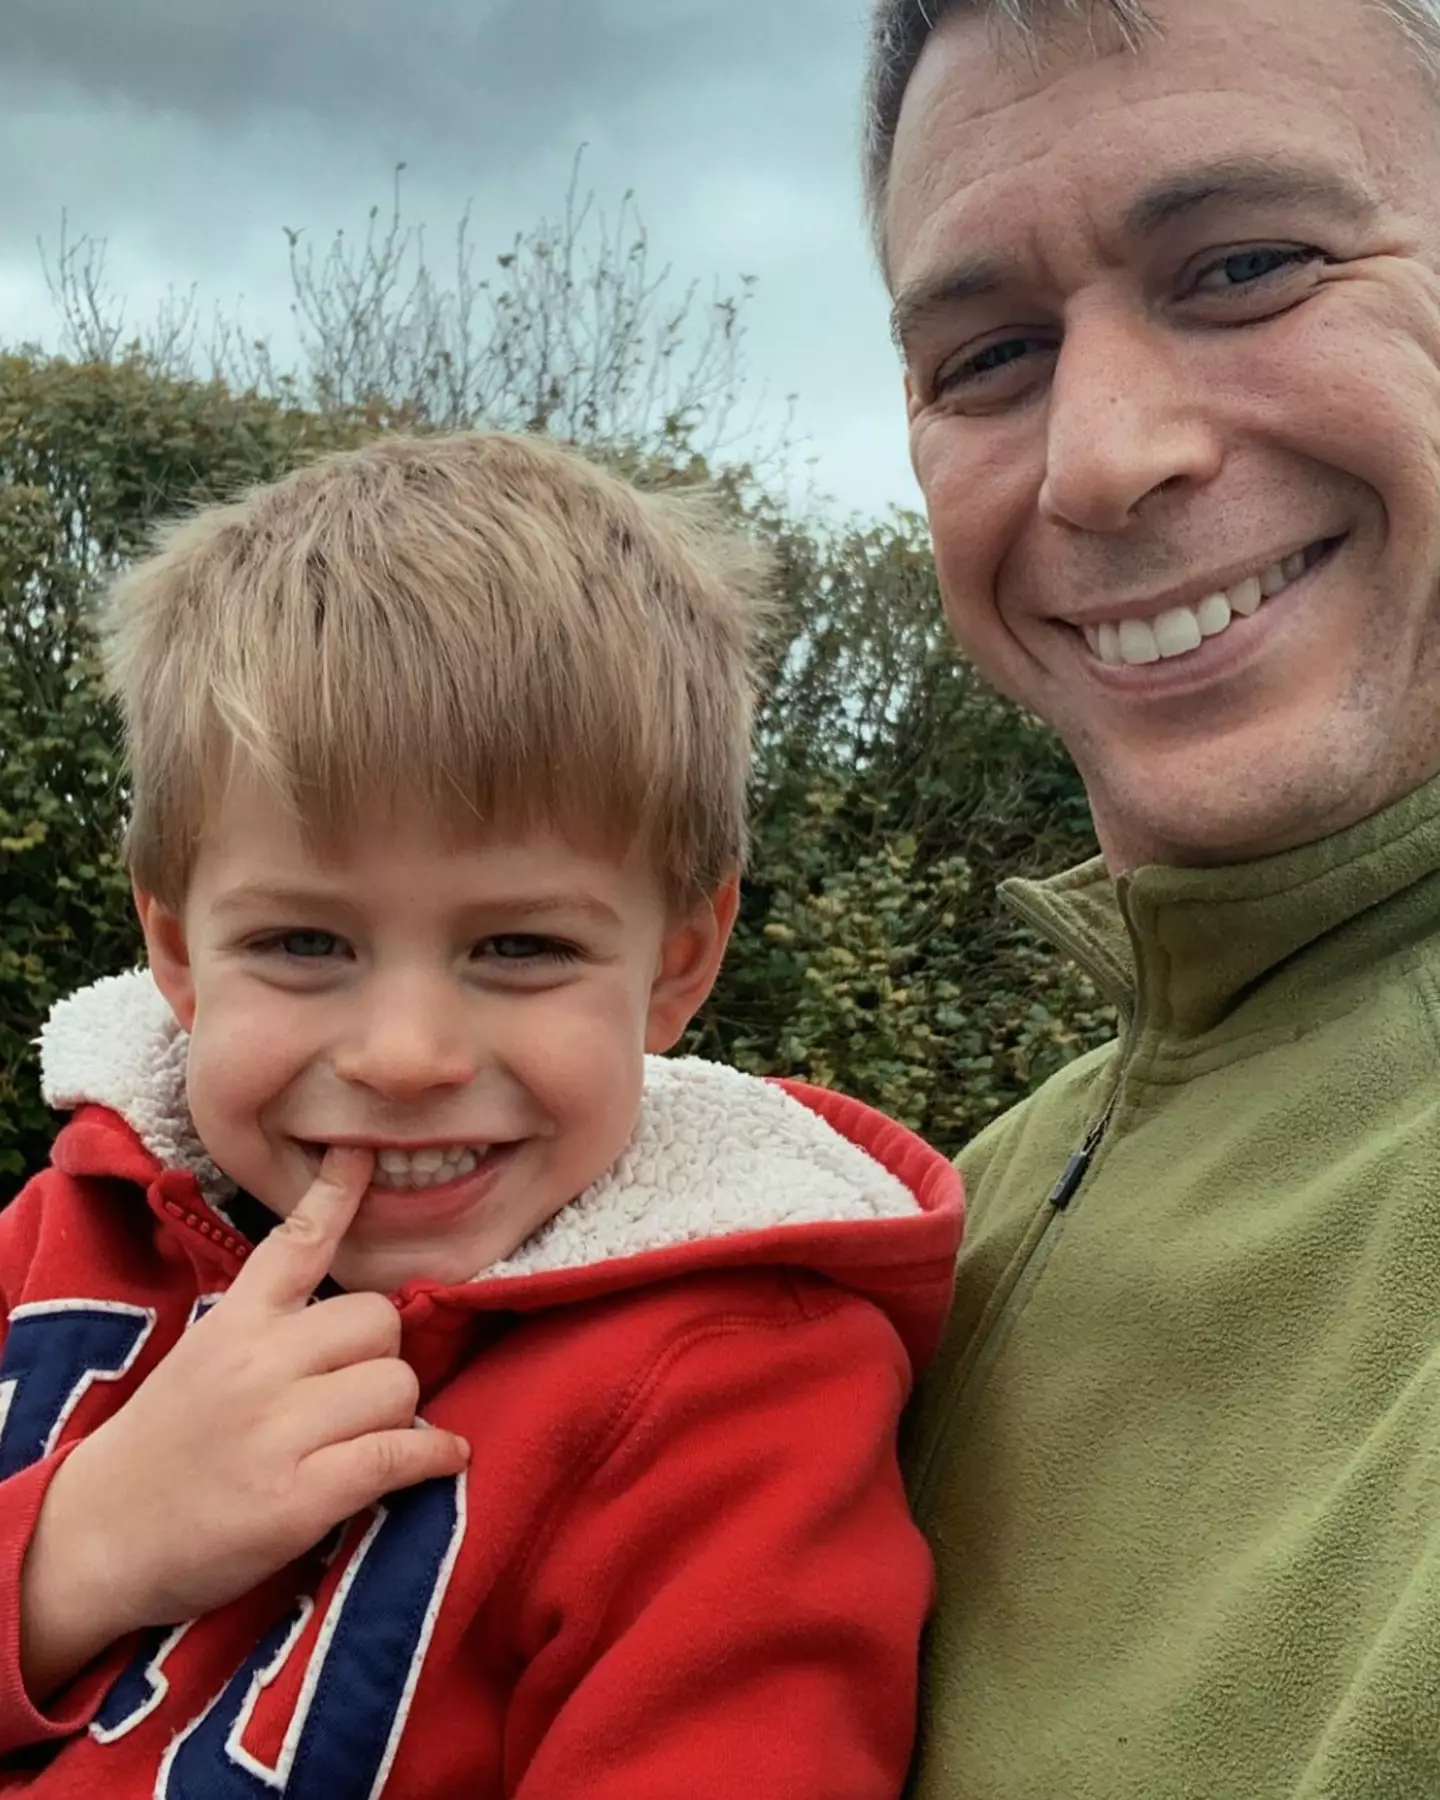 Martin shares snippets of his life to his 17.5k followers on Instagram. (Instagram/@martinpistorius)